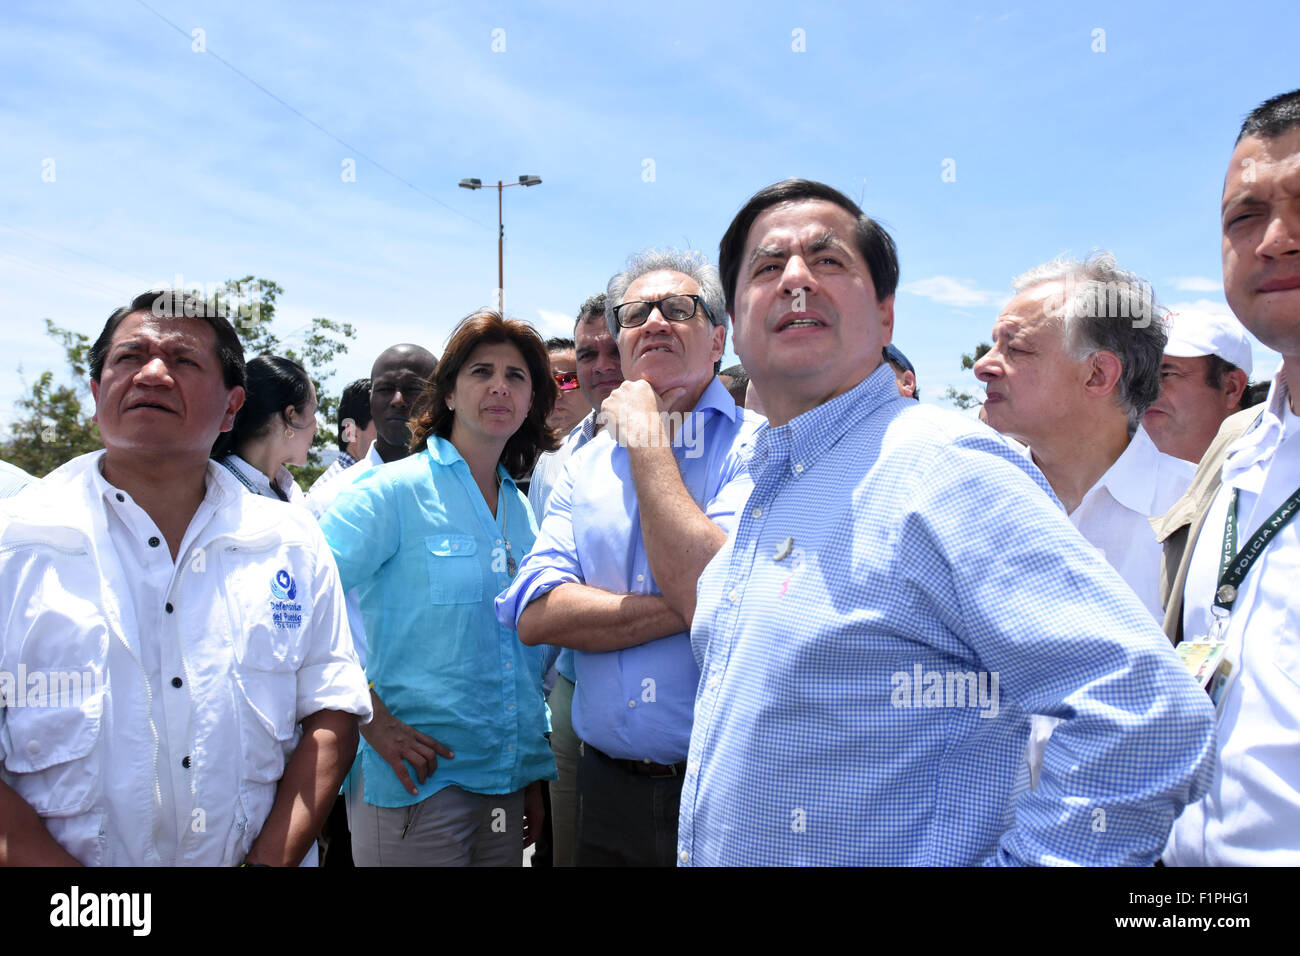 Cucuta, Colombia. 5th Sep, 2015. Image provided by the Organization of American States (OAS) shows OAS Secretary General Luis Almagro (C), accompanied by Colombian Foreign Minister Maria Angela Holguin (2nd L), visitng a shelter in Cucuta, Colombia, on Sept. 5, 2015. Luis Almagro on Saturday visited shelters in Cucuta for Colombians allegedly deported from Venezuela. © OAS/Xinhua/Alamy Live News Stock Photo